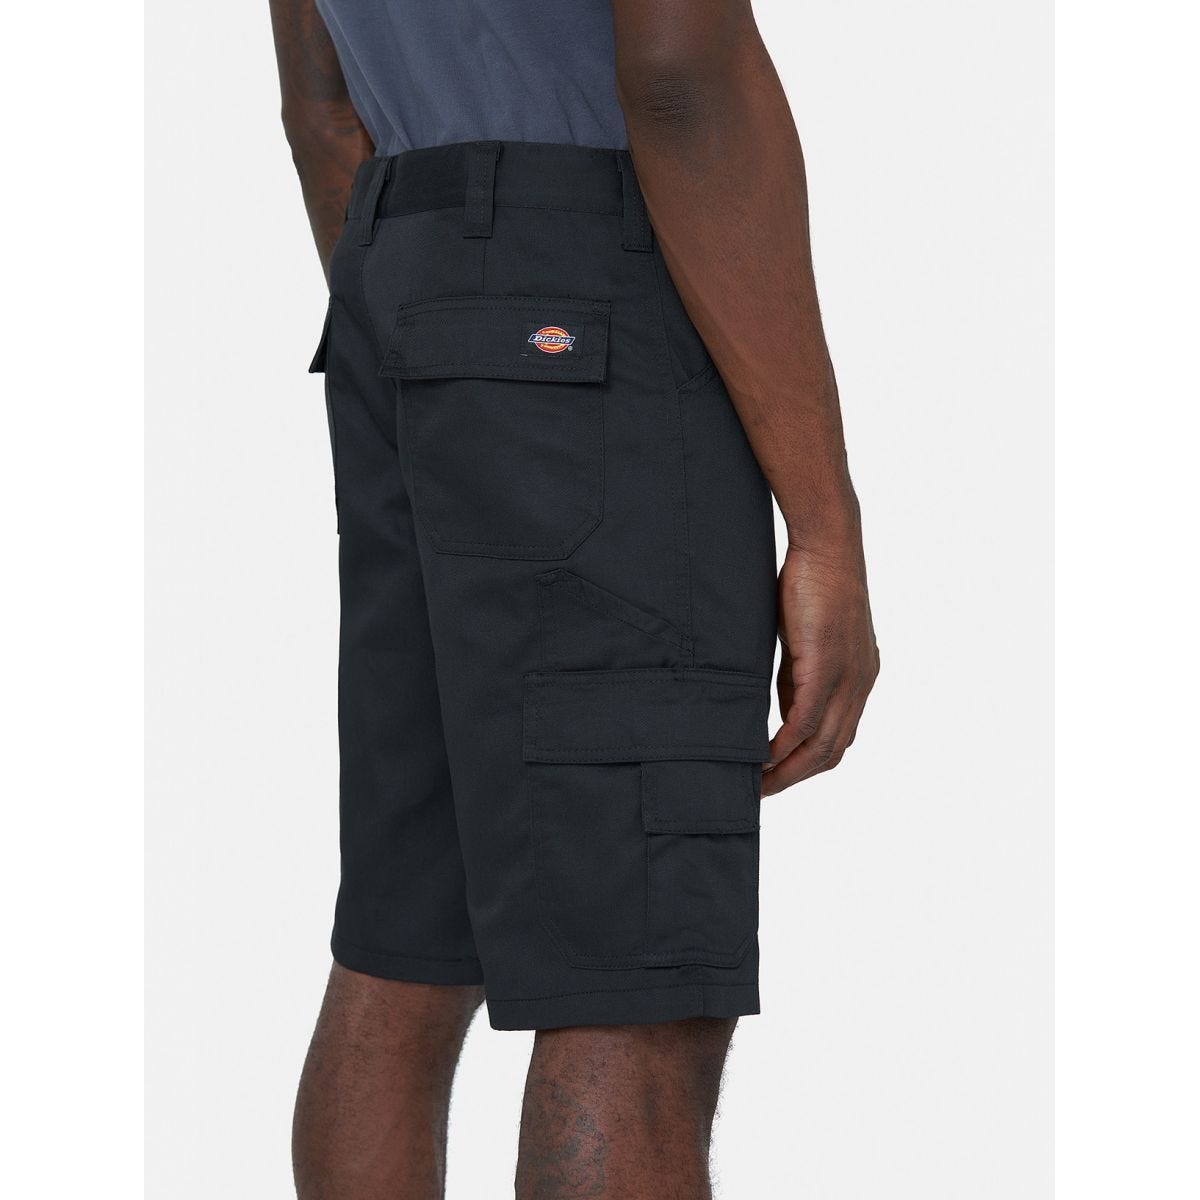 Short Everyday Noir - Dickies - Taille 50 3